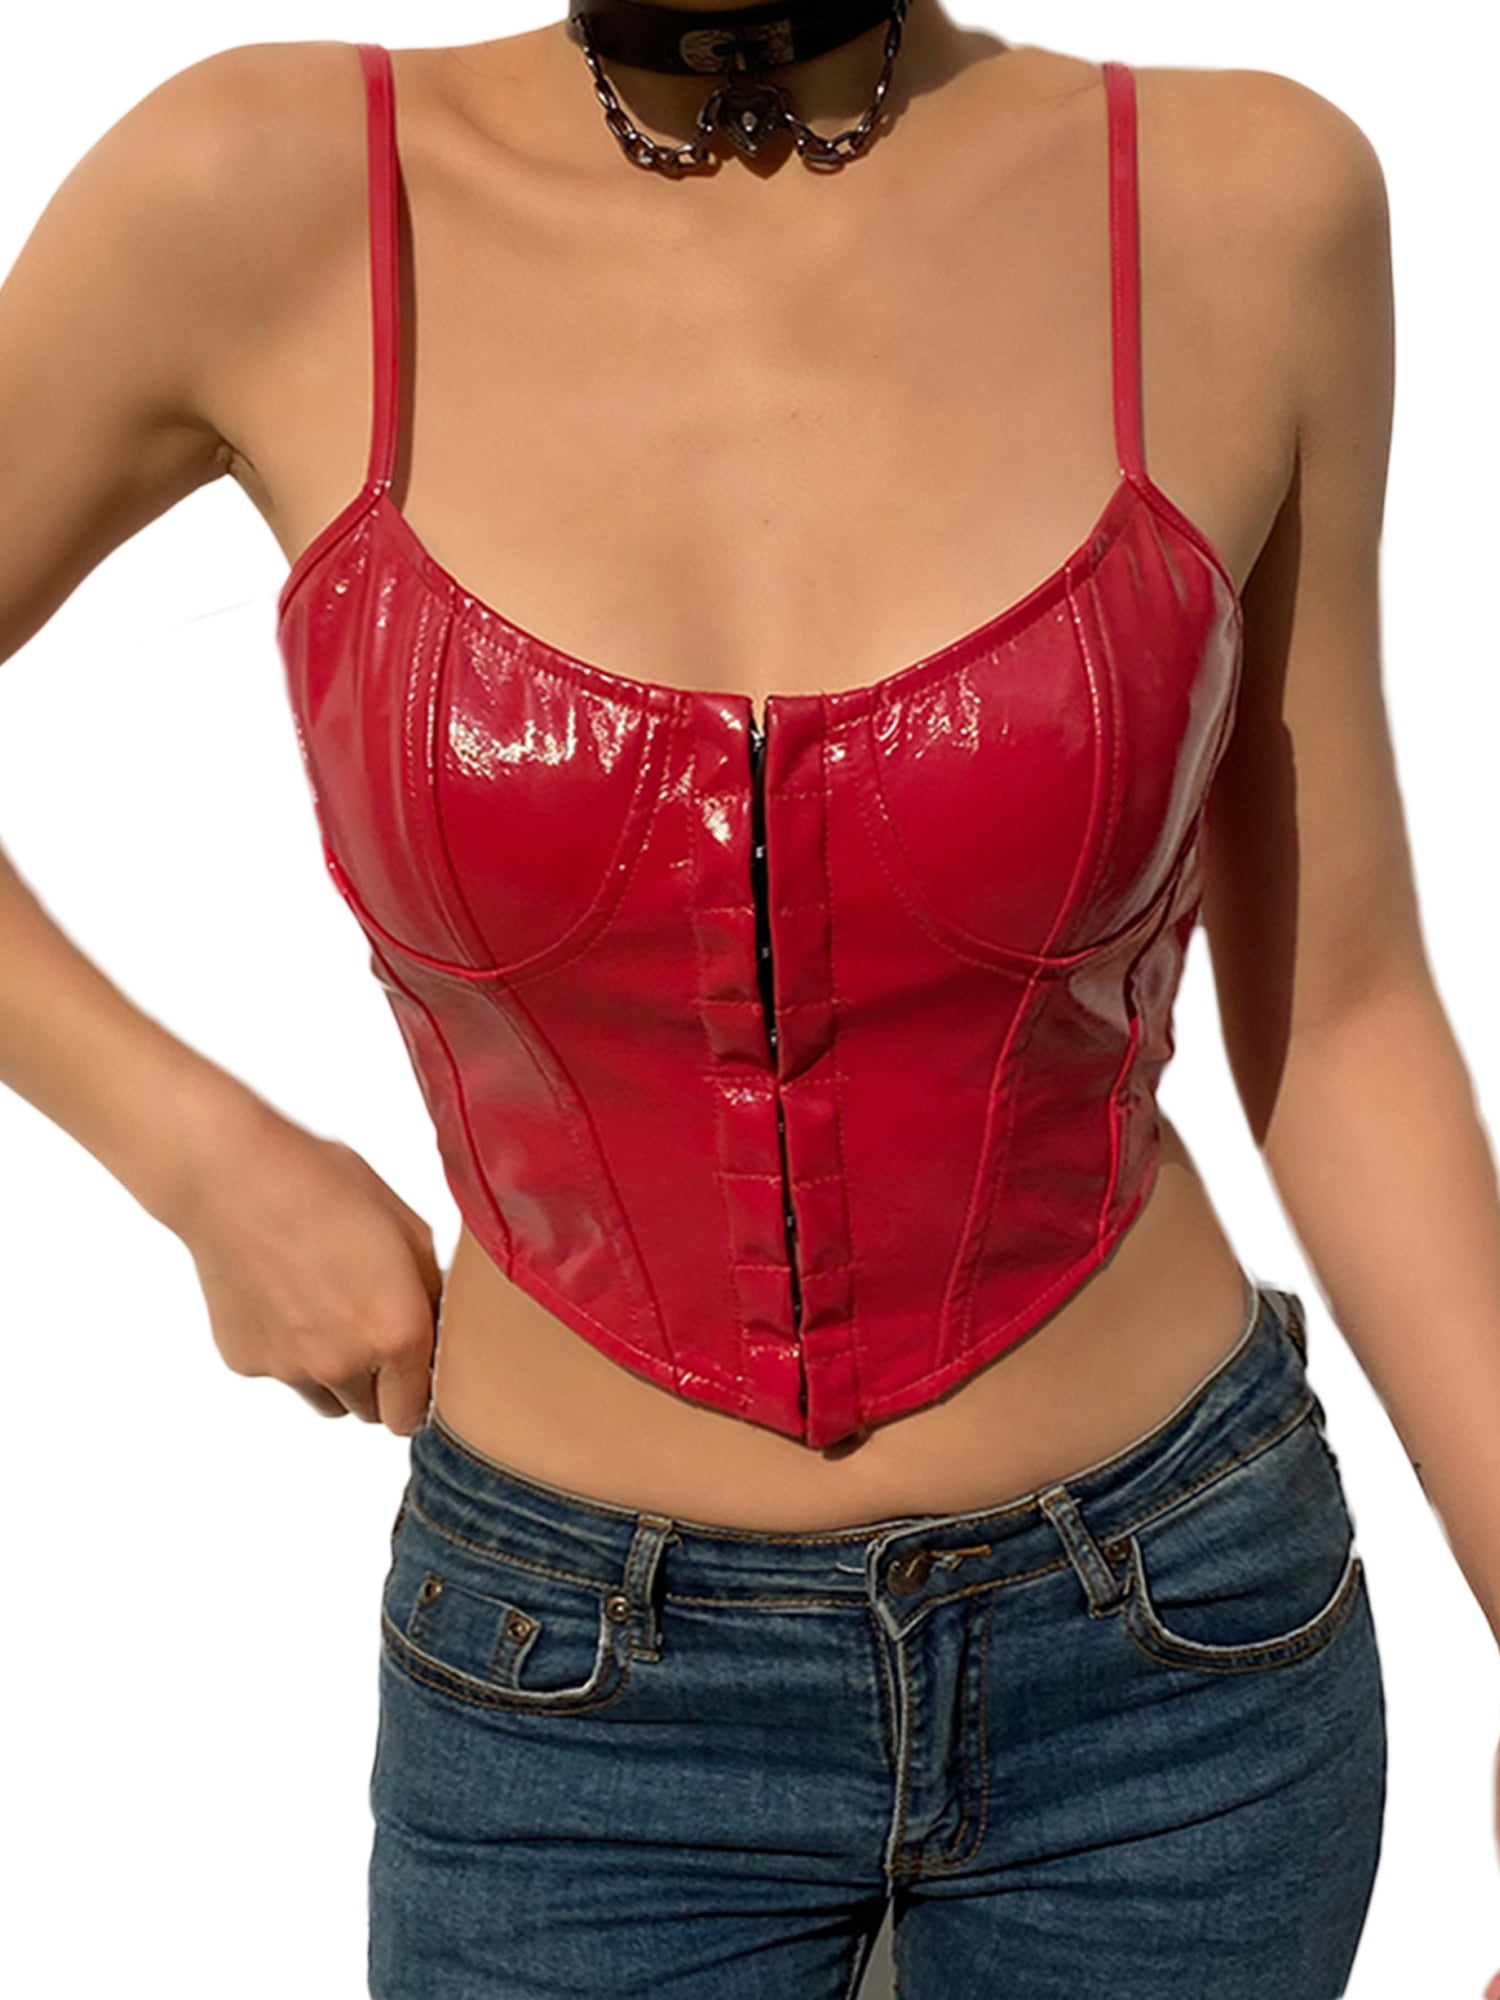 Leisure Bras Womens Tops Bra Bustier Corset Faux Leather Latex Pullover